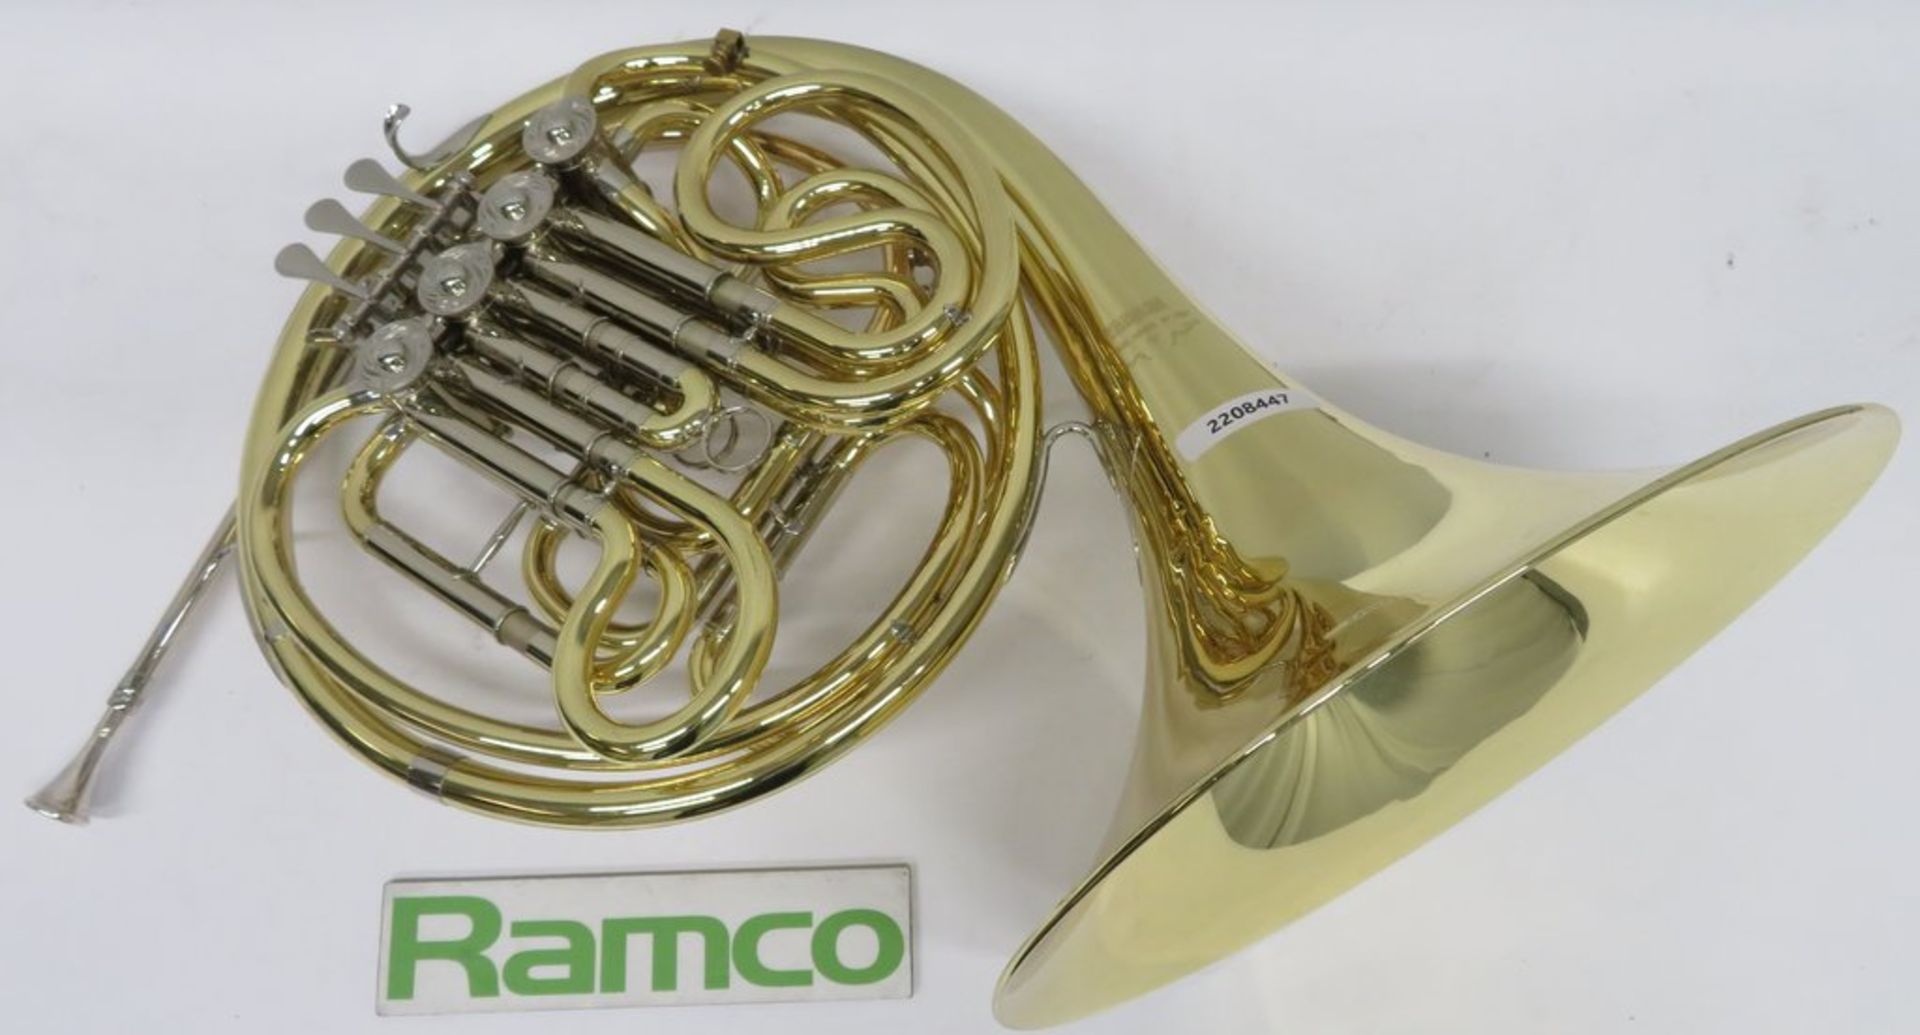 Yamaha YHR 667V French Horn With Case. Serial Number: 001738. This Item Has Not Been Teste - Image 4 of 16